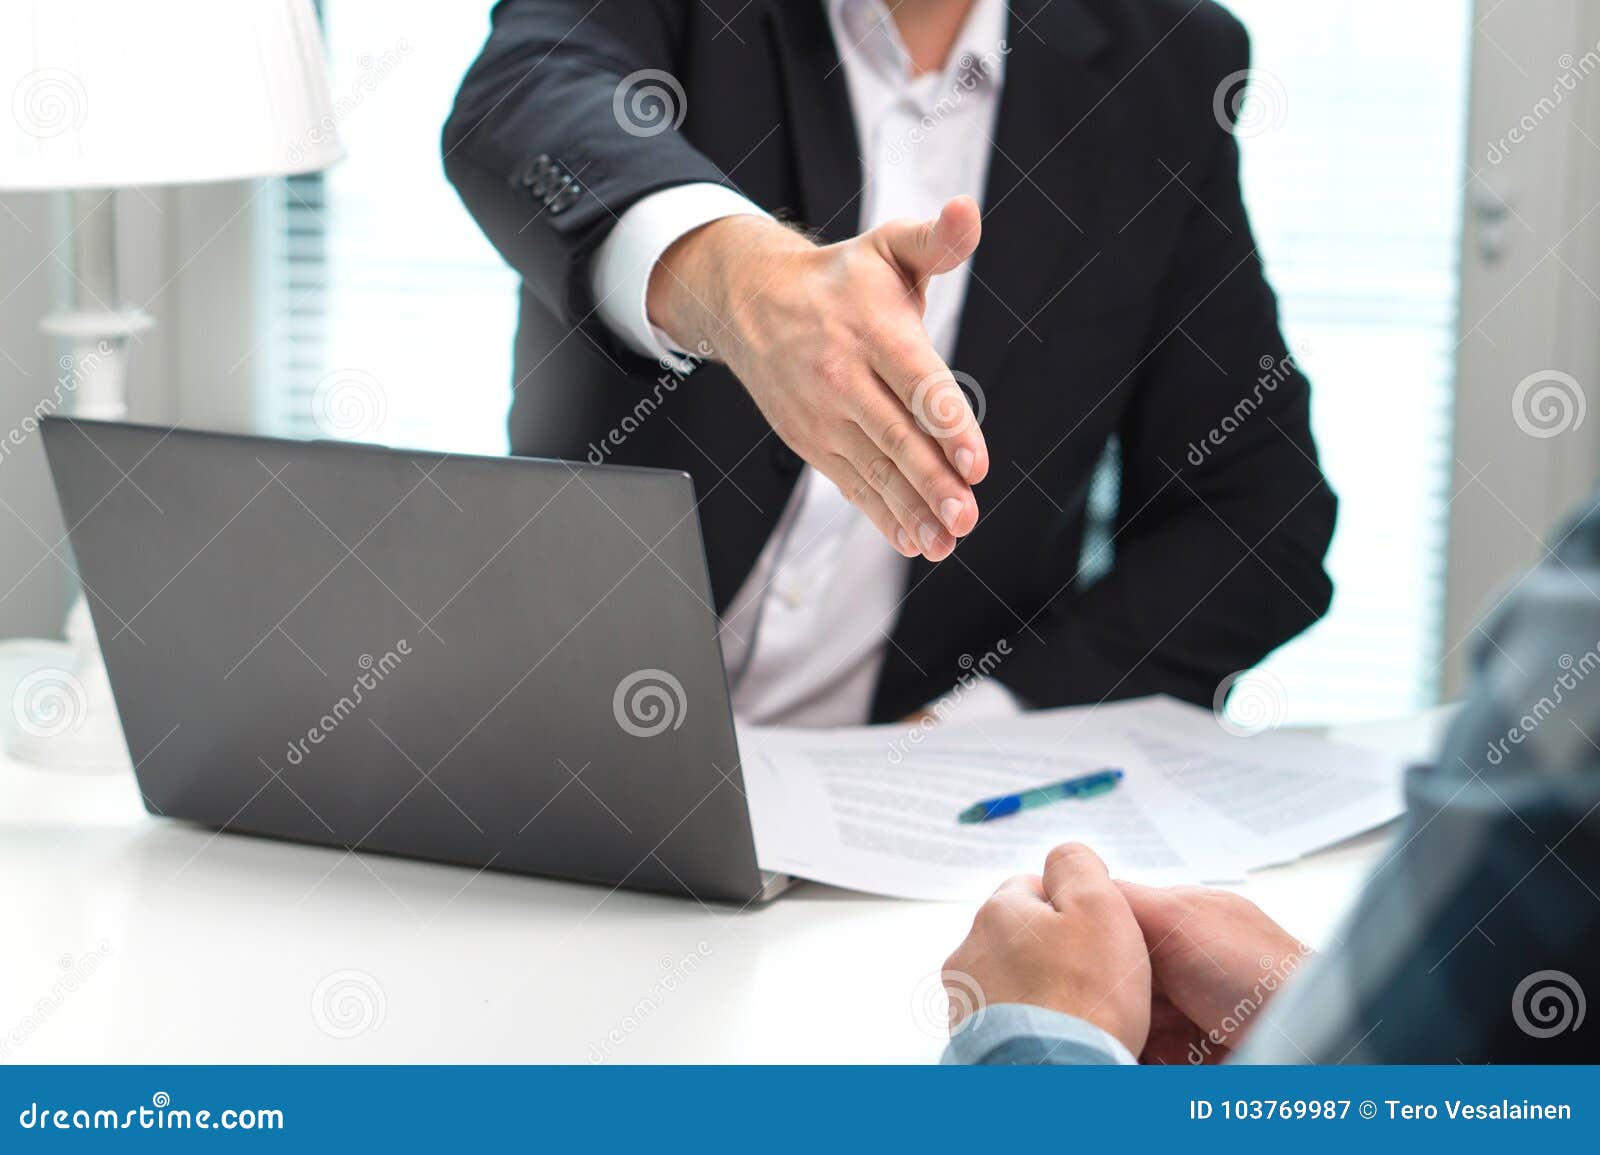 business man offer and give hand for handshake in office.